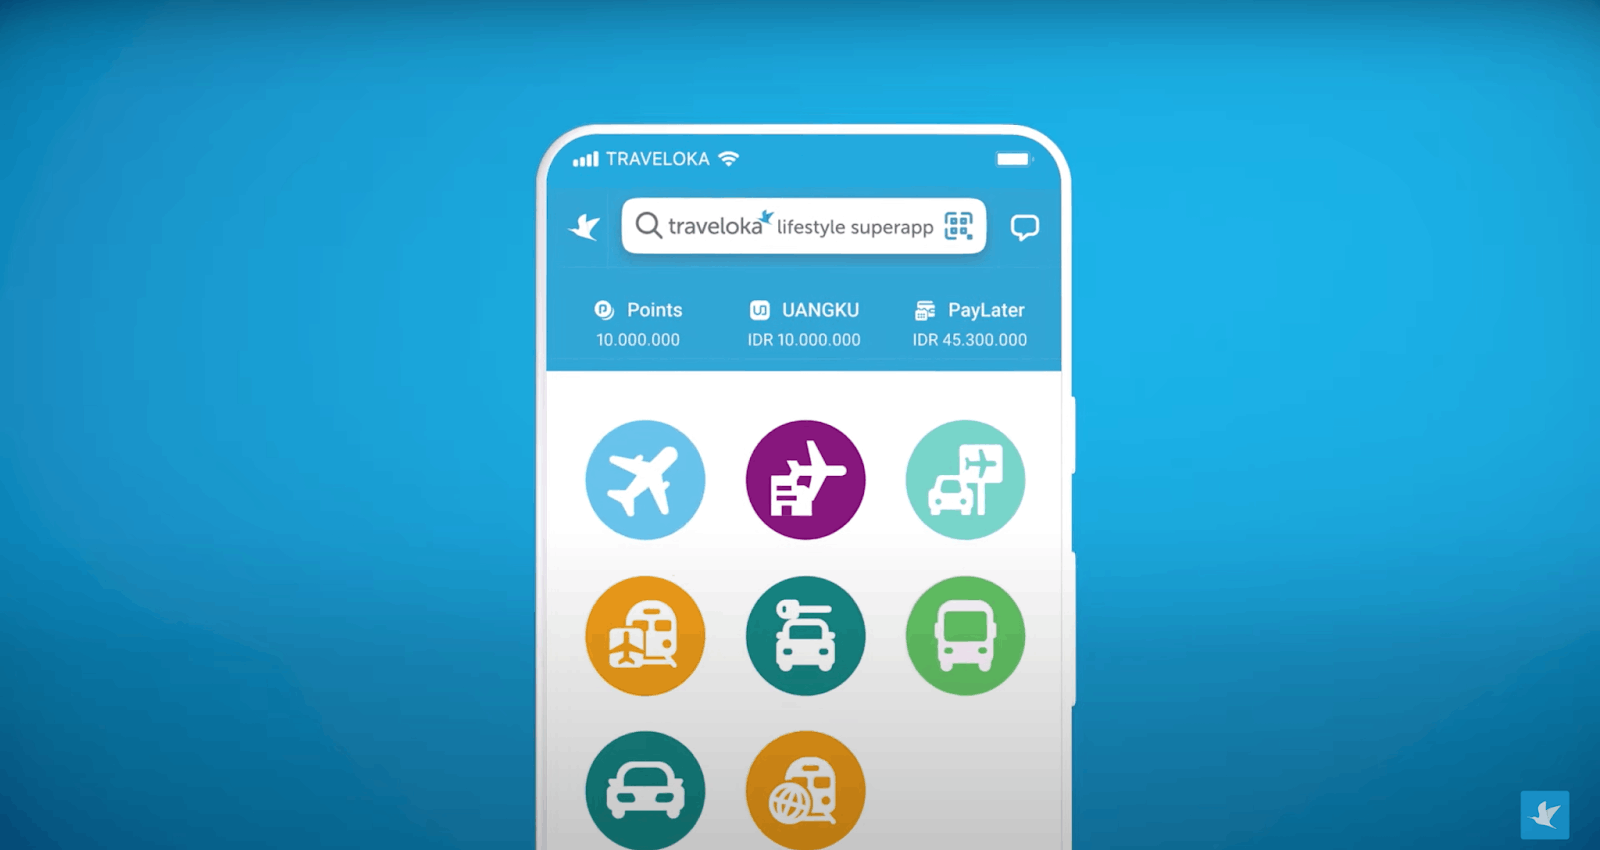 Traveloka App - Discover How to Use this Tool